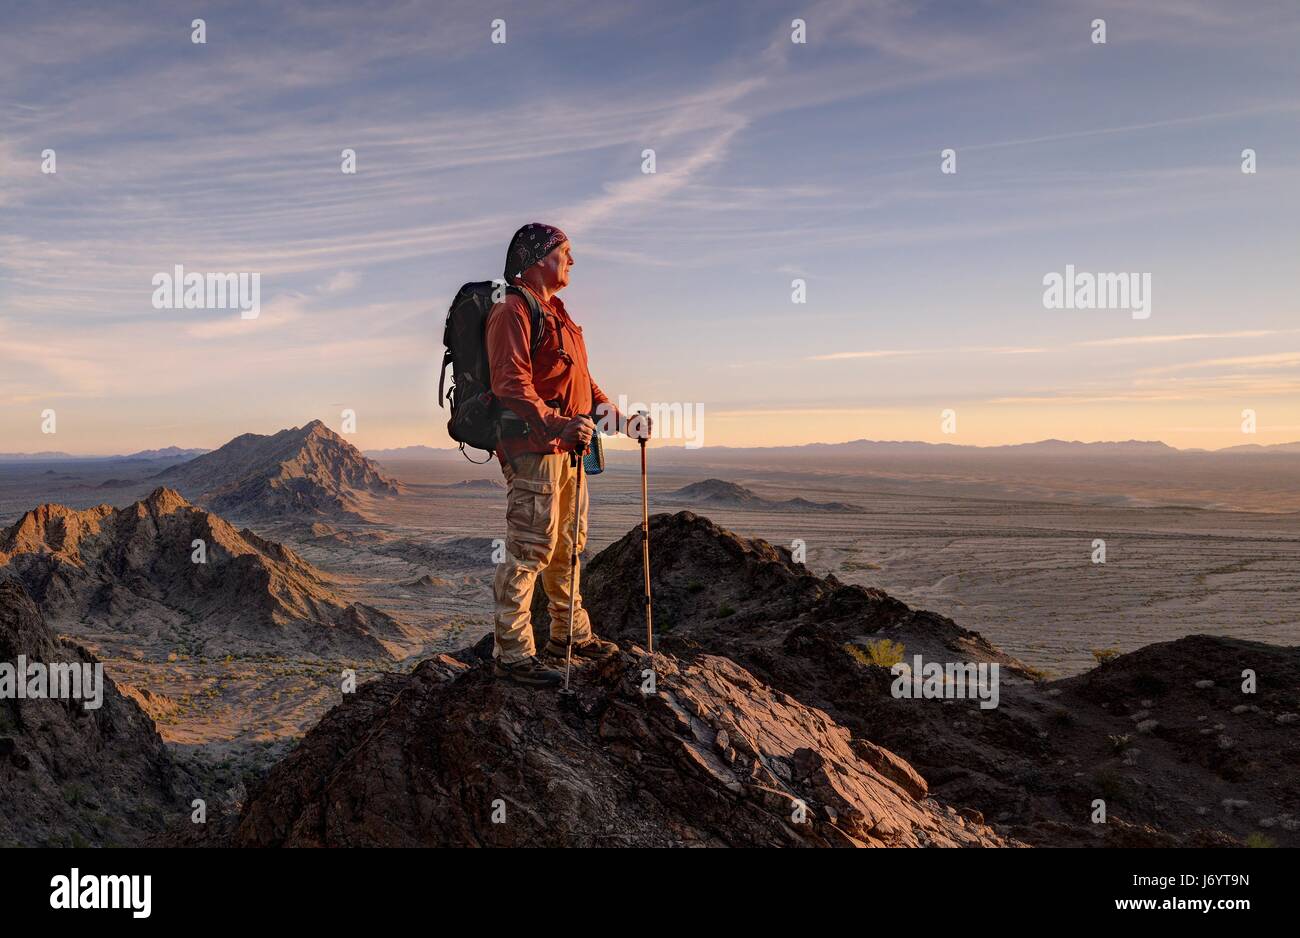 Hiker in the Mohawk Mountains at Sunset, Arizona, United States Stock Photo